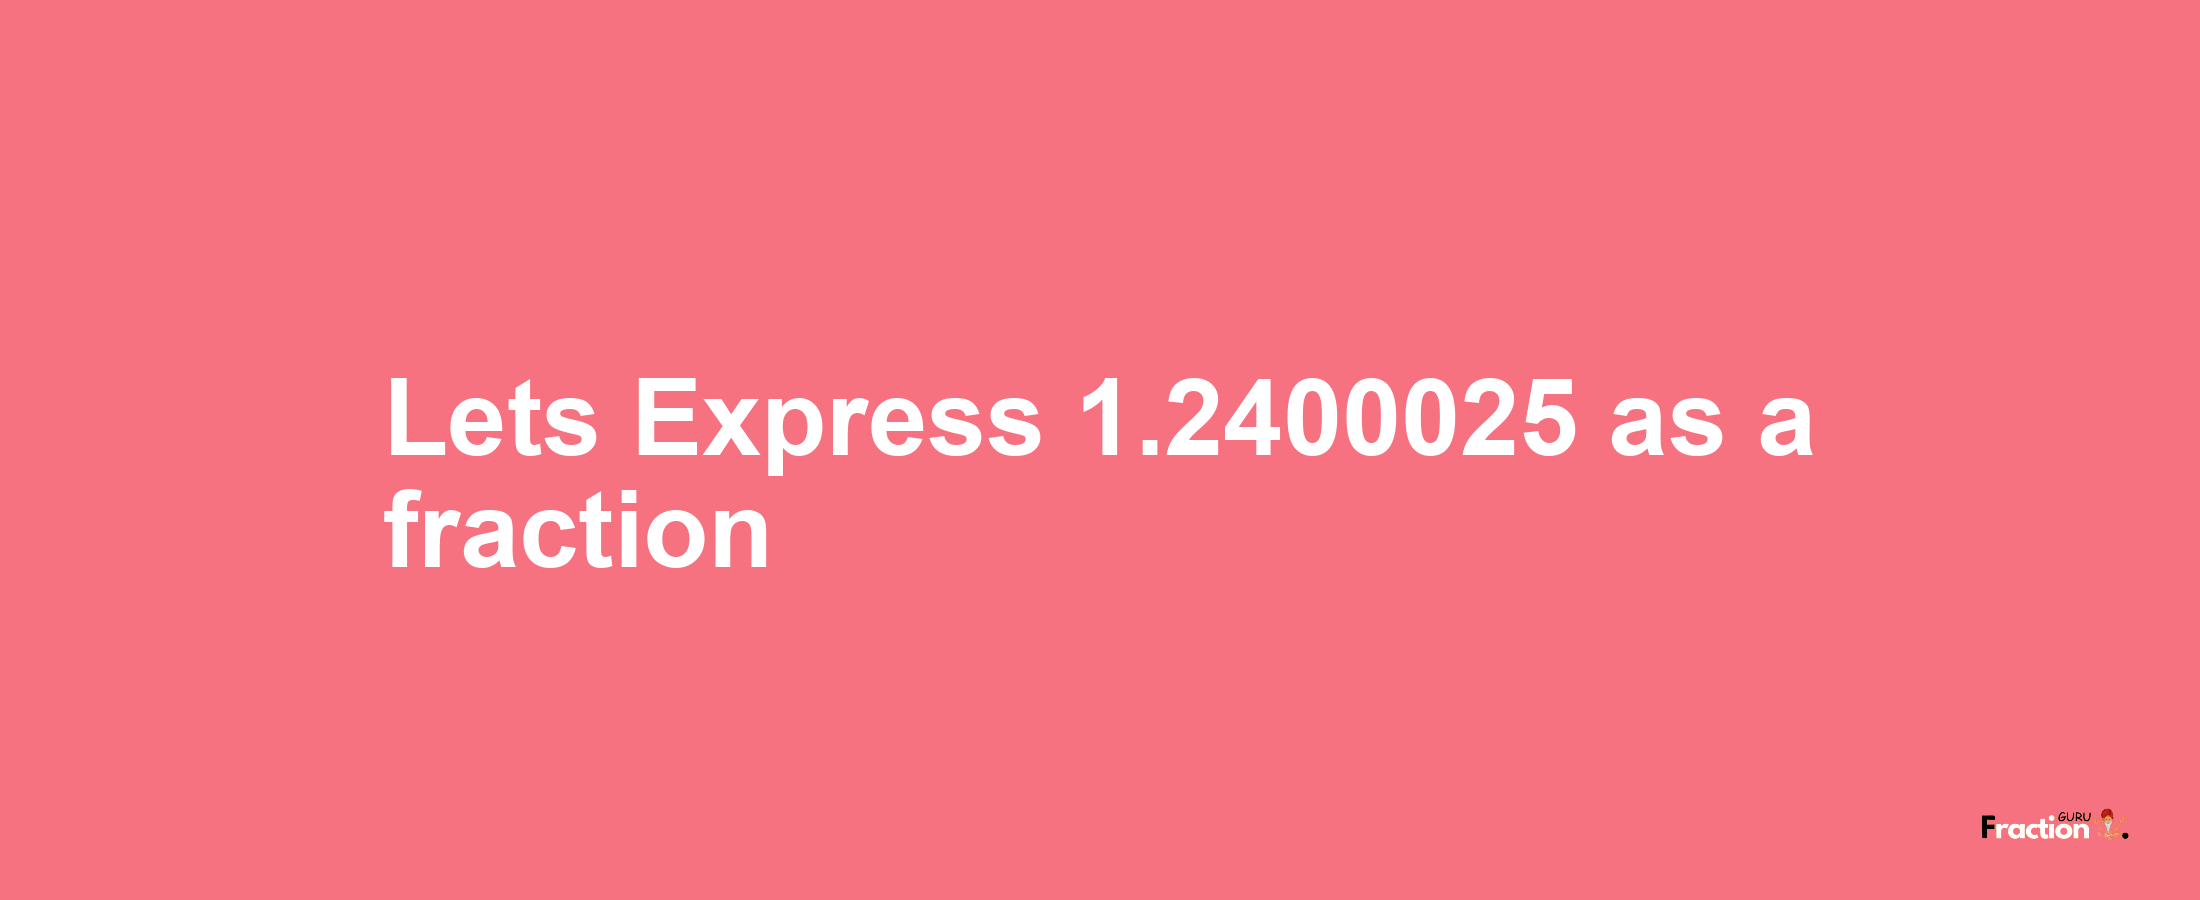 Lets Express 1.2400025 as afraction